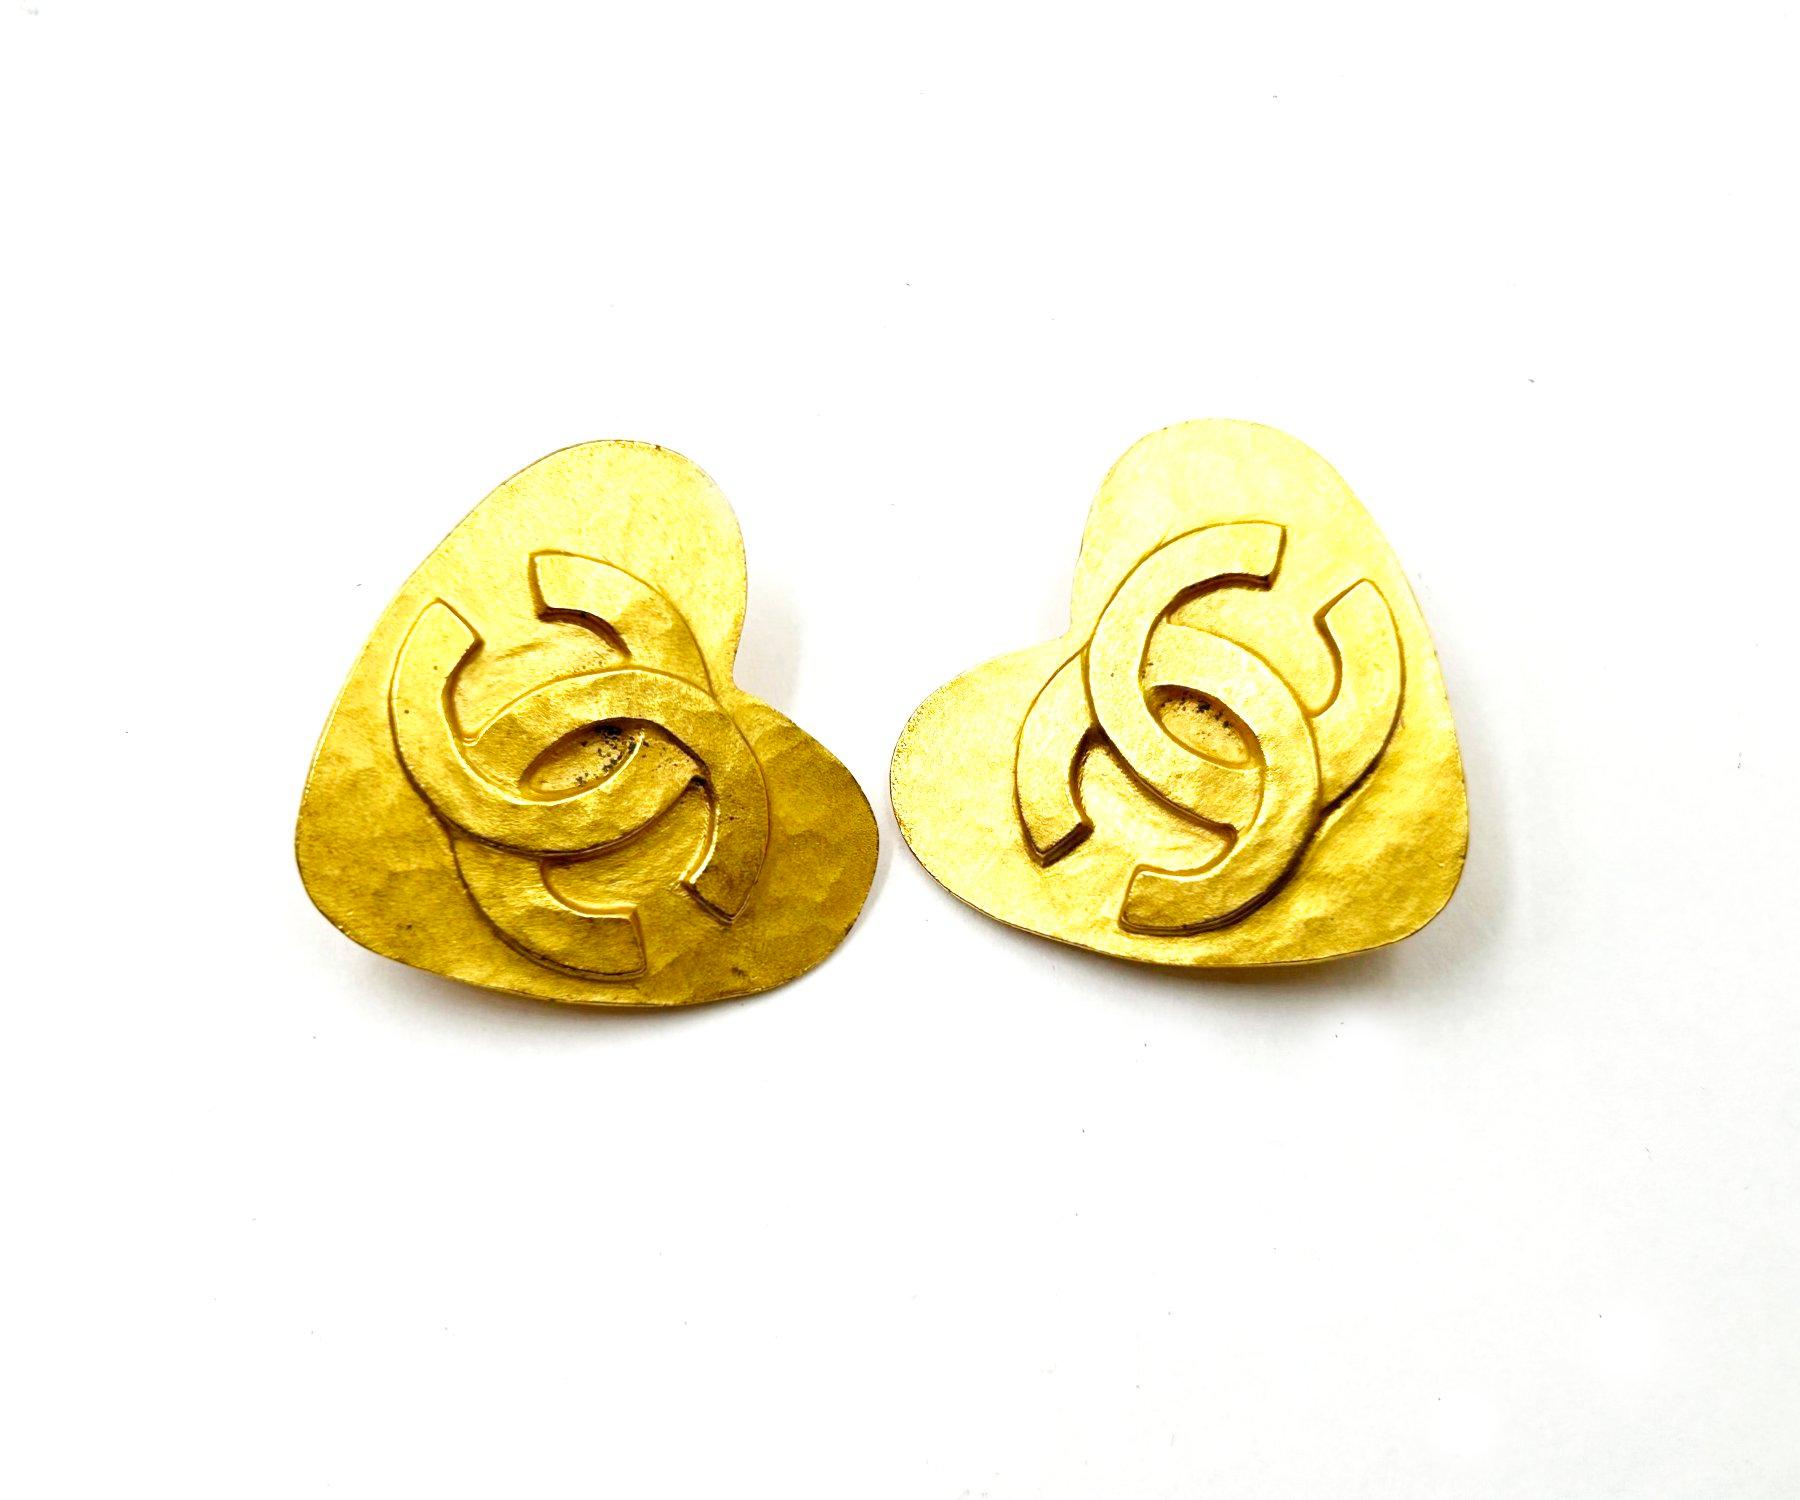 Chanel Rare Vintage Gold Plated CC Heart Stud Clip on Earrings

*Marked 95
*Made in France
*Comes with the original box

-It is approximately 1.25